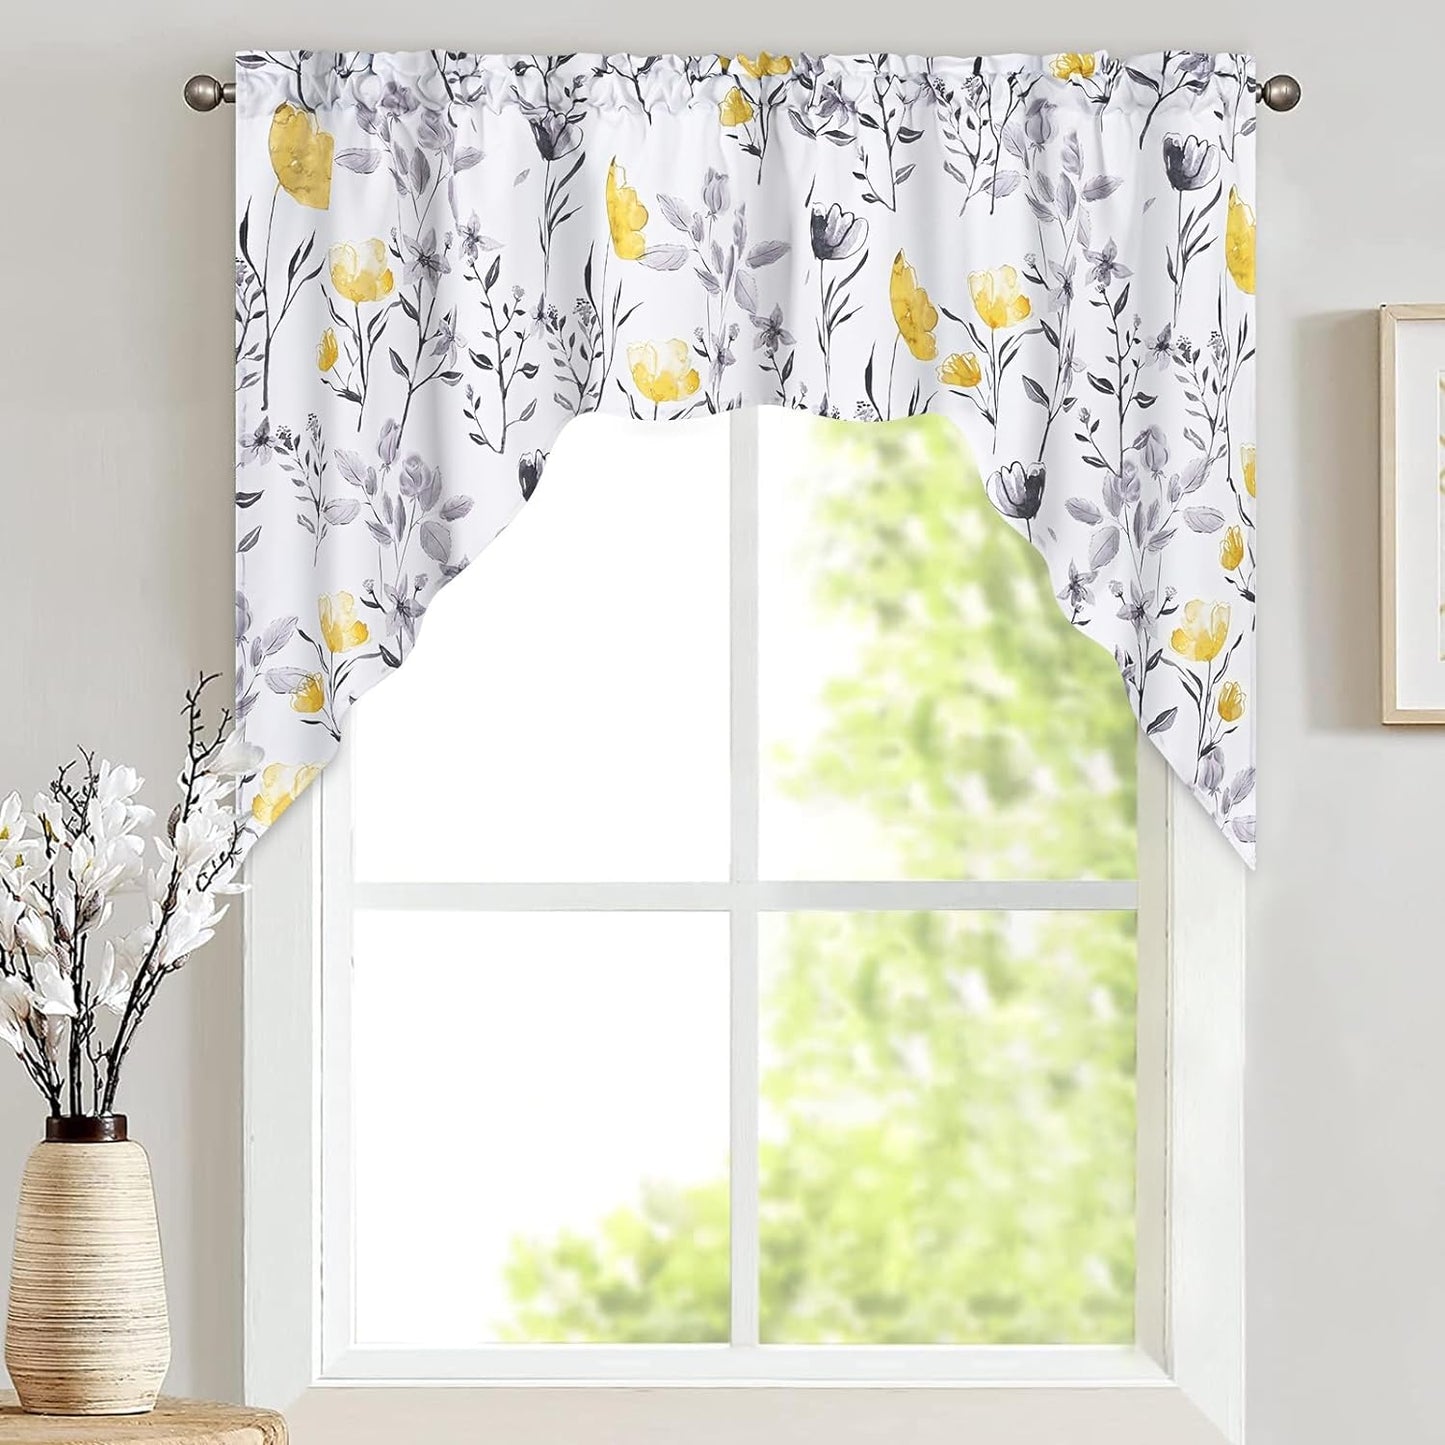 Likiyol Floral Kithchen Curtains 36 Inch Watercolor Flower Leaves Tier Curtains, Yellow and Gray Floral Cafe Curtains, Rod Pocket Small Window Curtain for Cafe Bathroom Bedroom Drapes  Likiyol Yellow 36"L X 60"W 